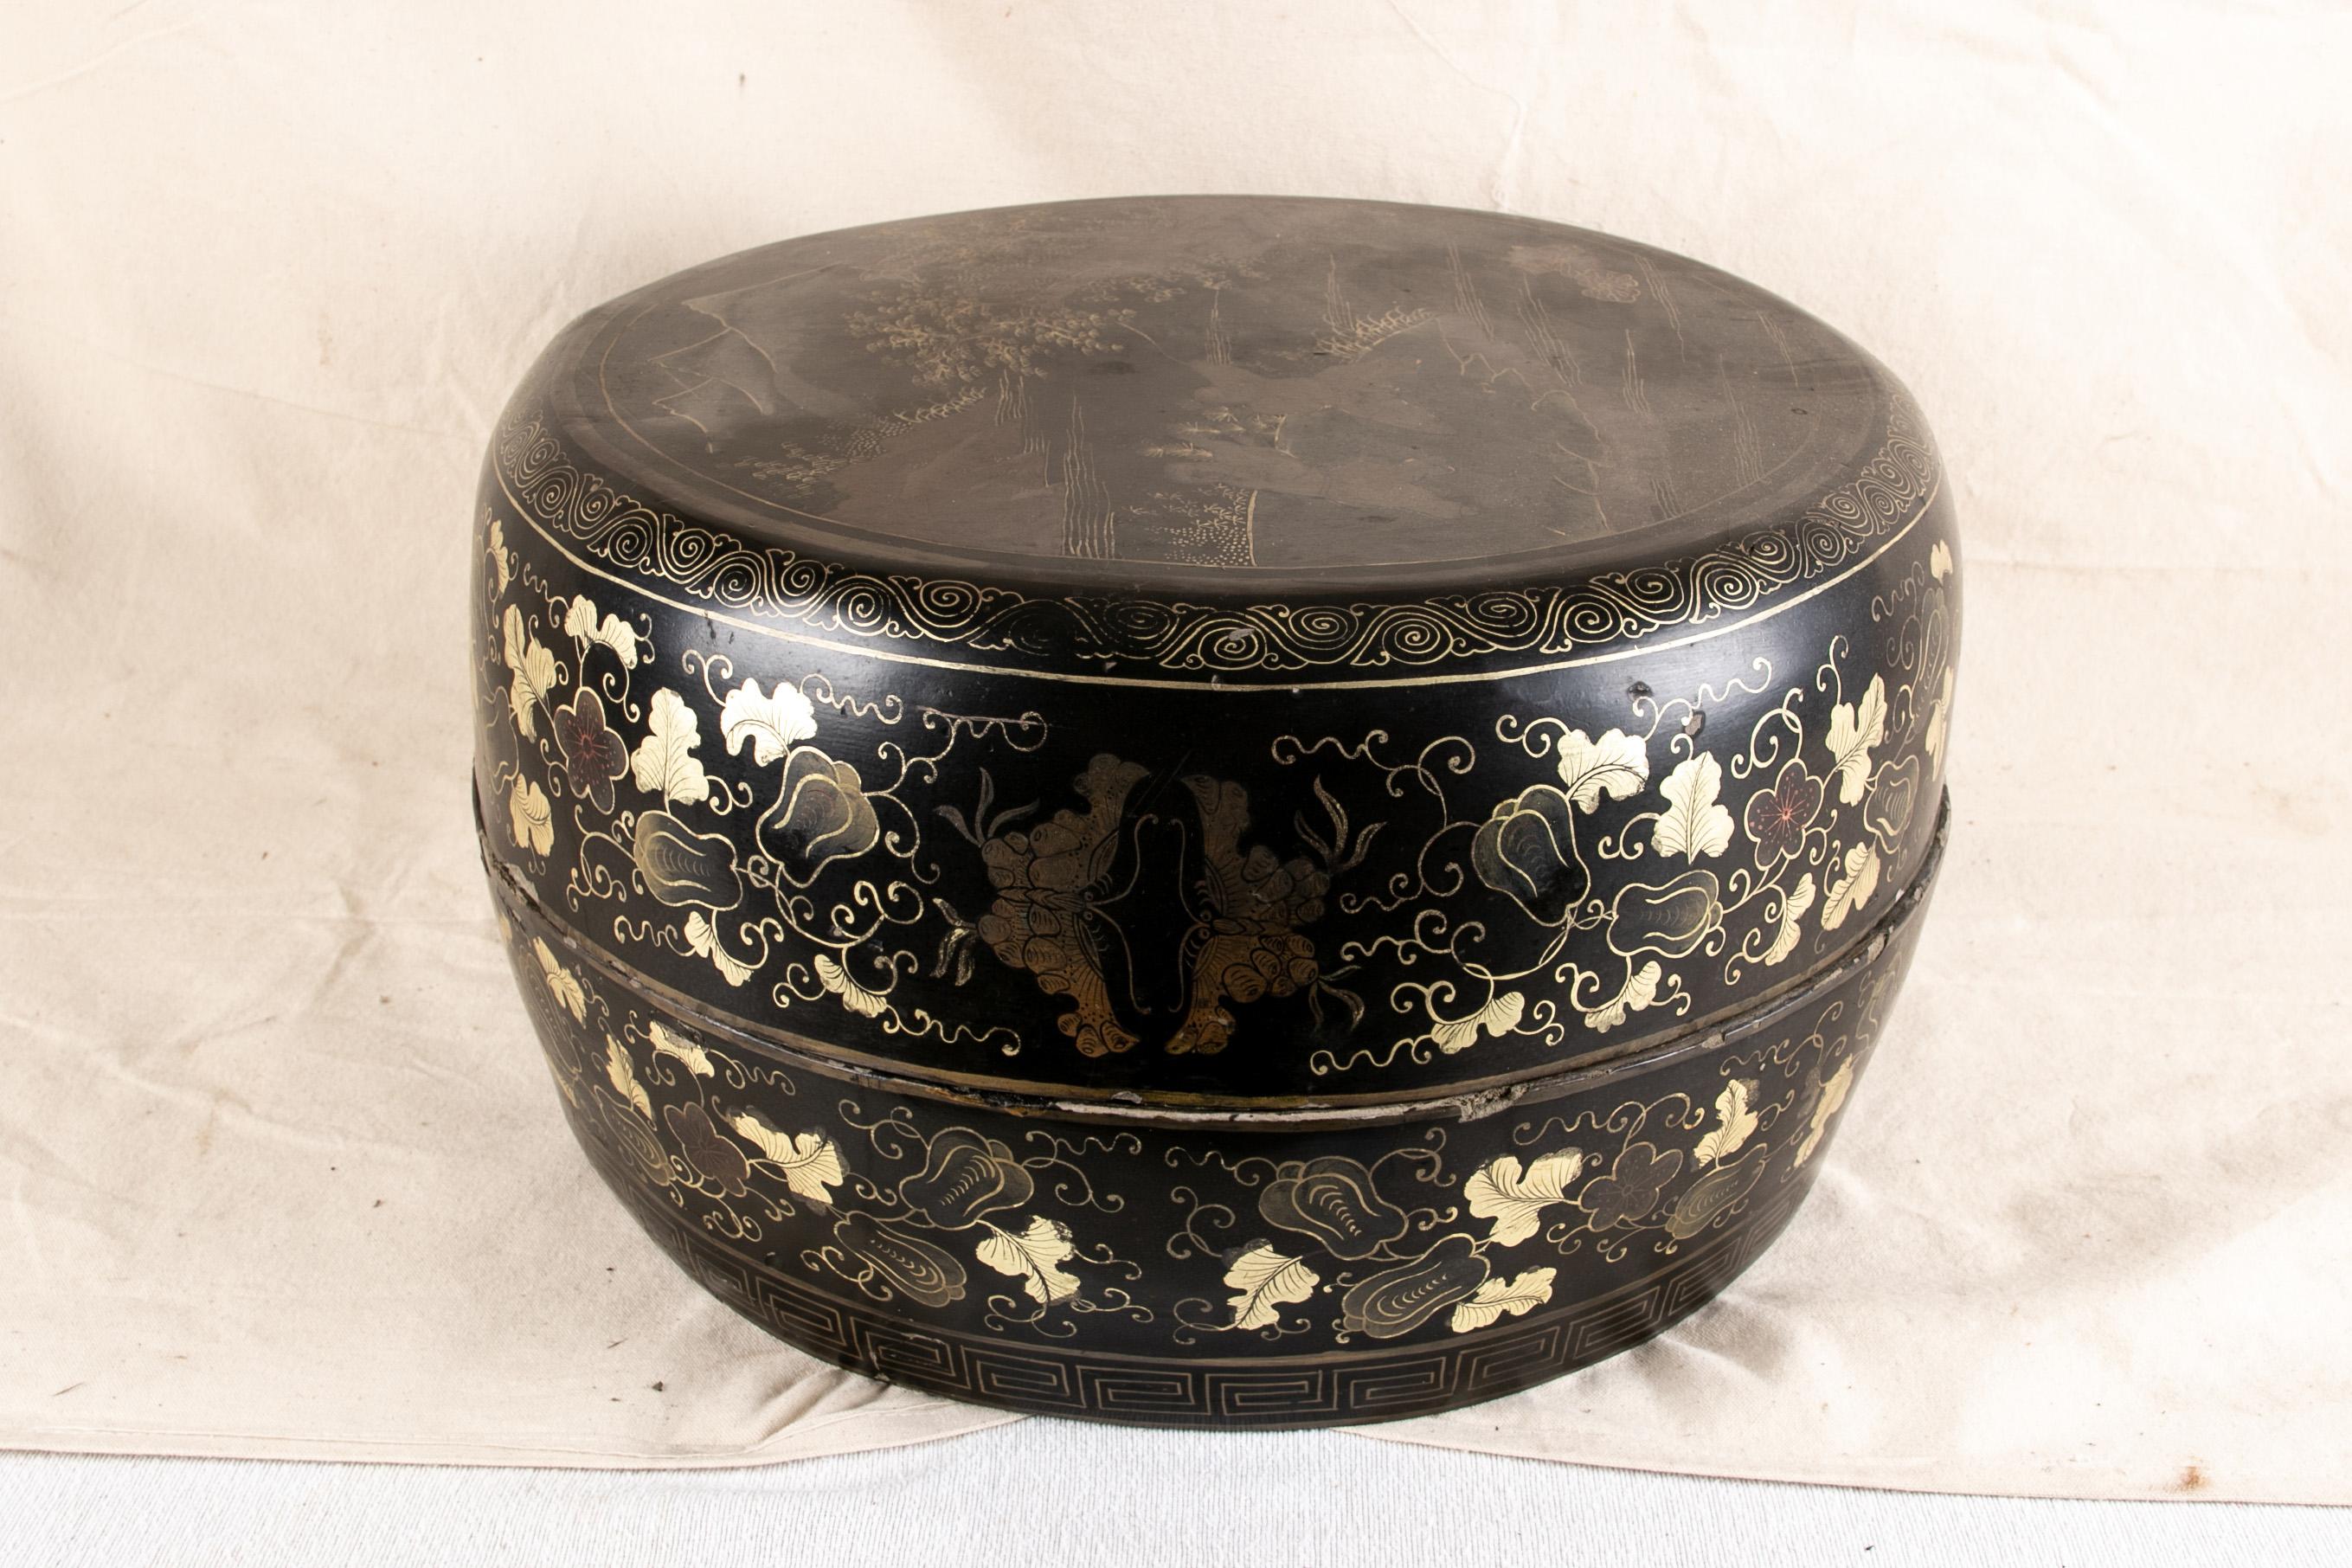 Large antique oriental lacquered and decorated box, circular box in black lacquer with white, kpurple and gilt decoration, lid depicting two children flying a kite against a forest landscape with mountains in the distance, sides decorated with leafy